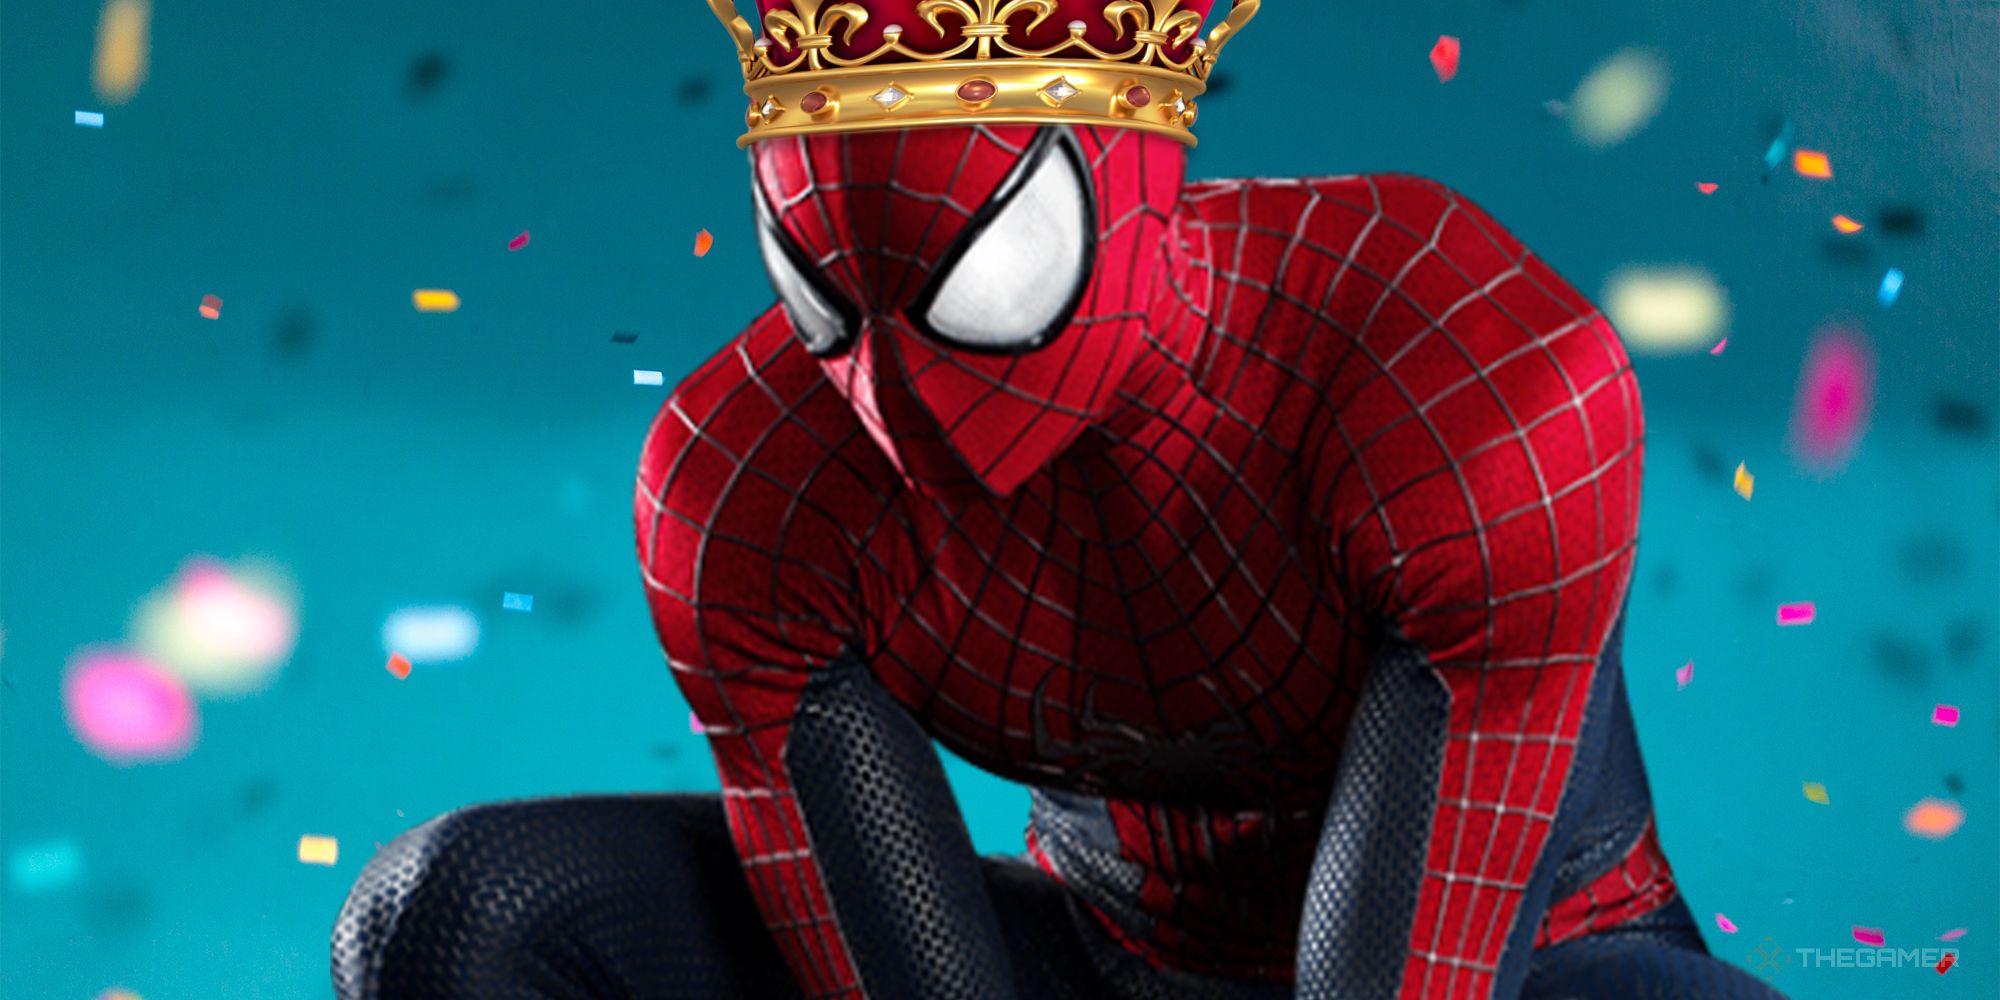 Andrew garfield's spider-man crouched down with a crown on his head